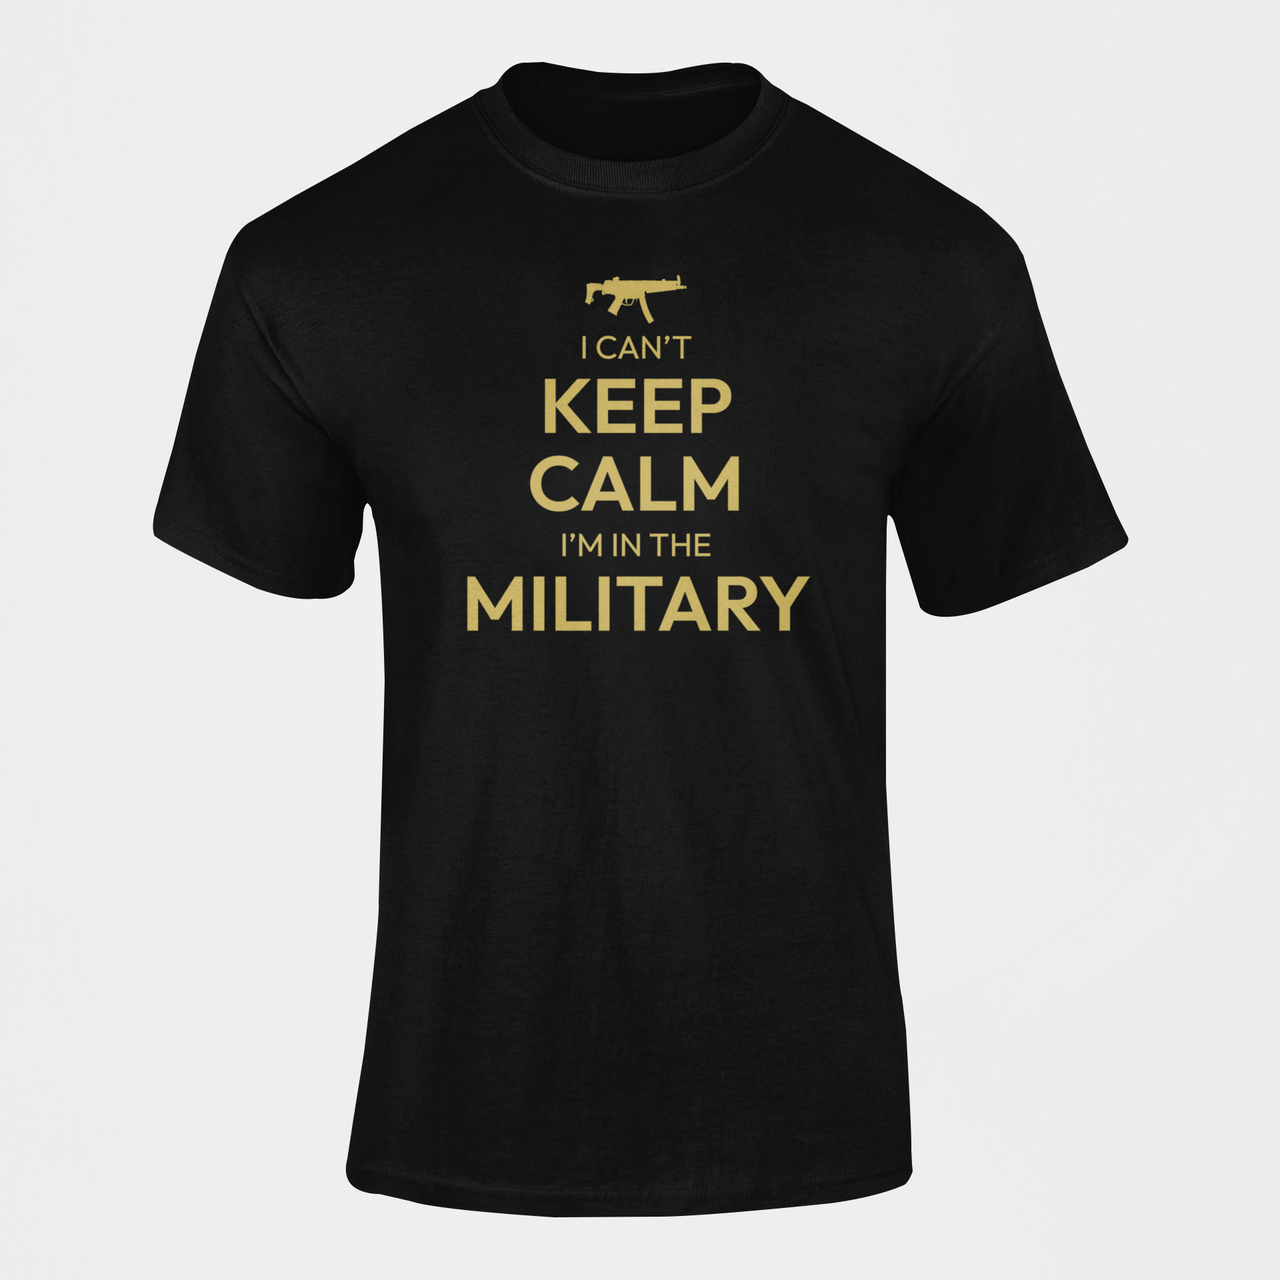 Military T-shirt - I Can't Keep Calm, I Am in the Military (Men)